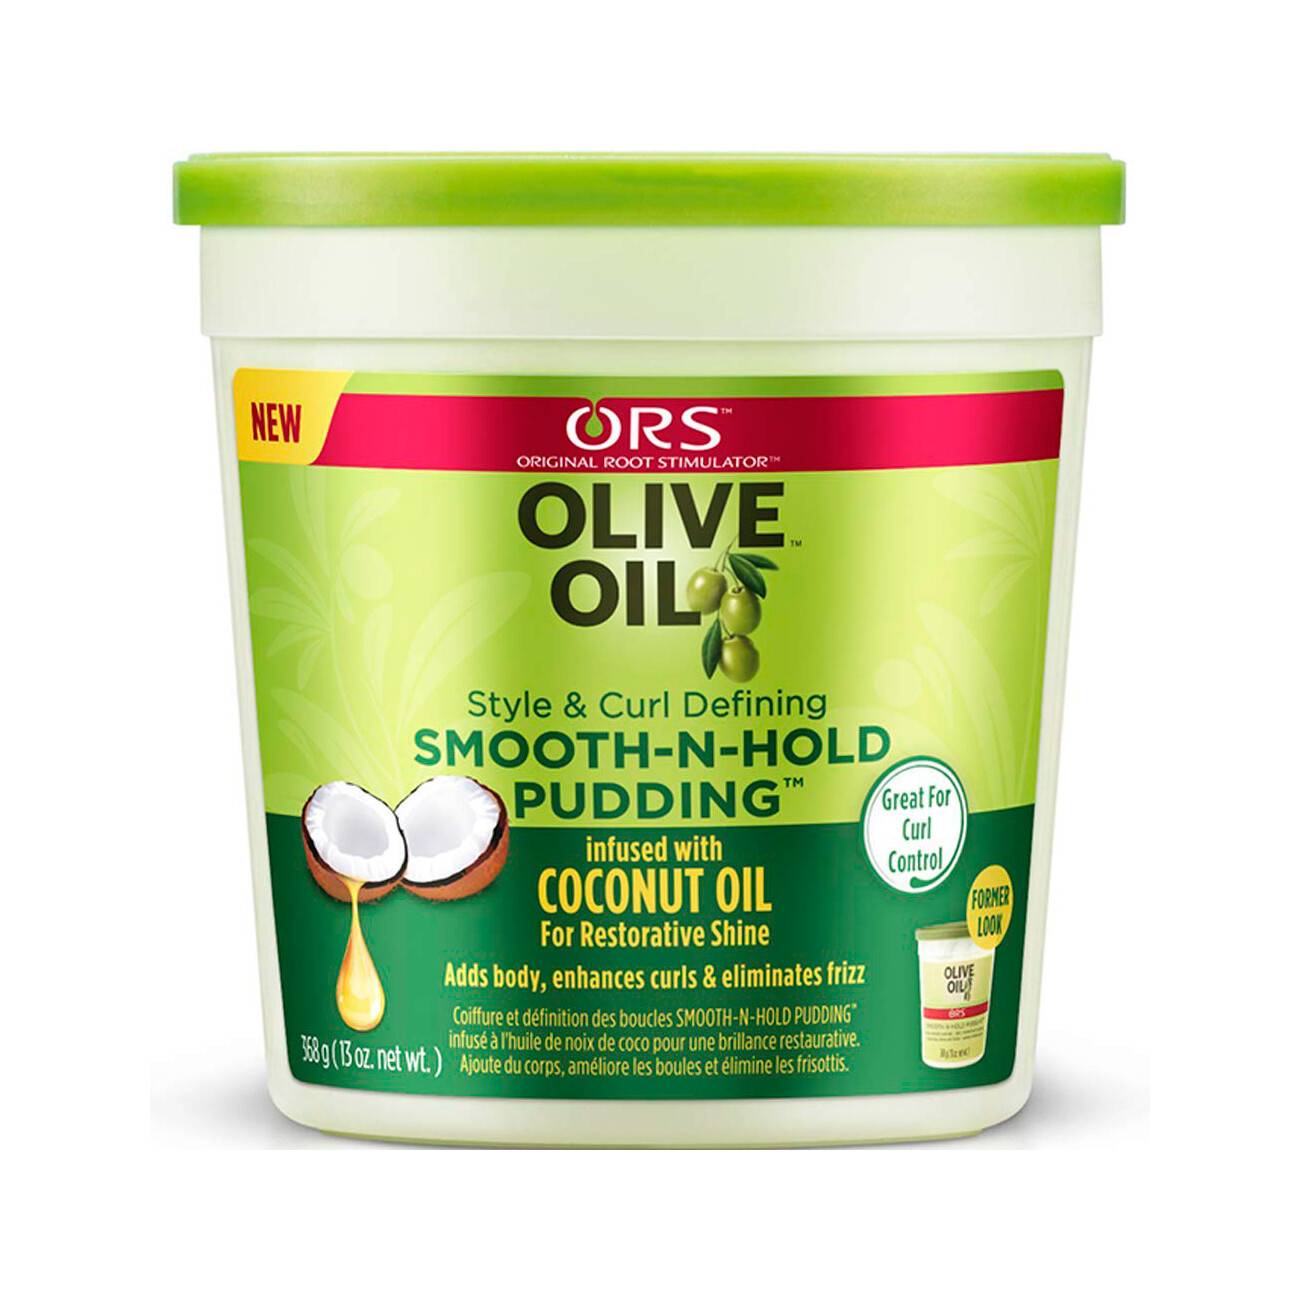 ORS Olive Oil Smooth-N-Hold Pudding 13oZ ( 368g )